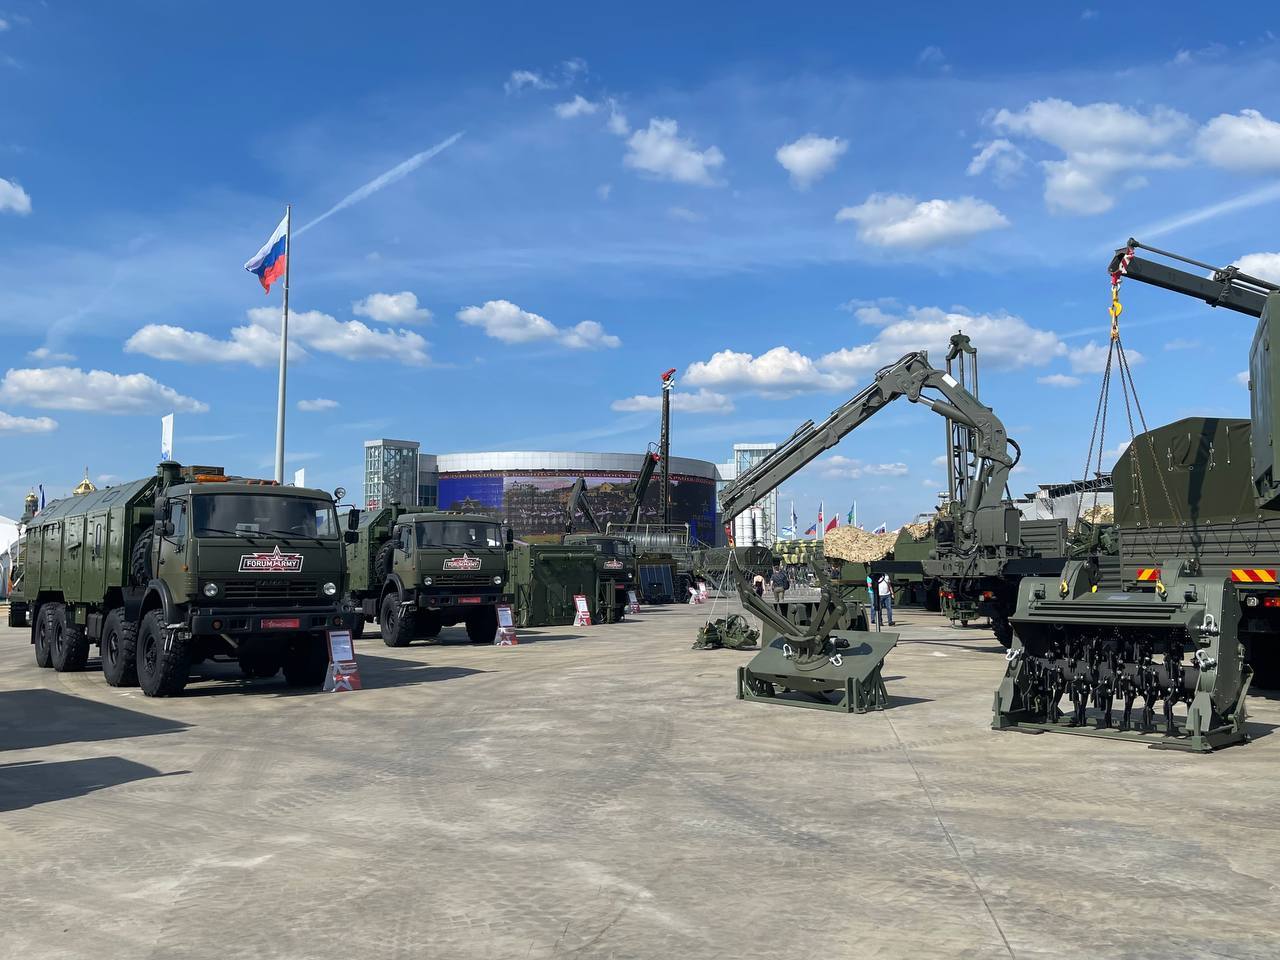 Forum Army 2022 - My, Army, Military, Military equipment, Rocket, Tanks, Patriotism, Exhibition, Mobile photography, Longpost